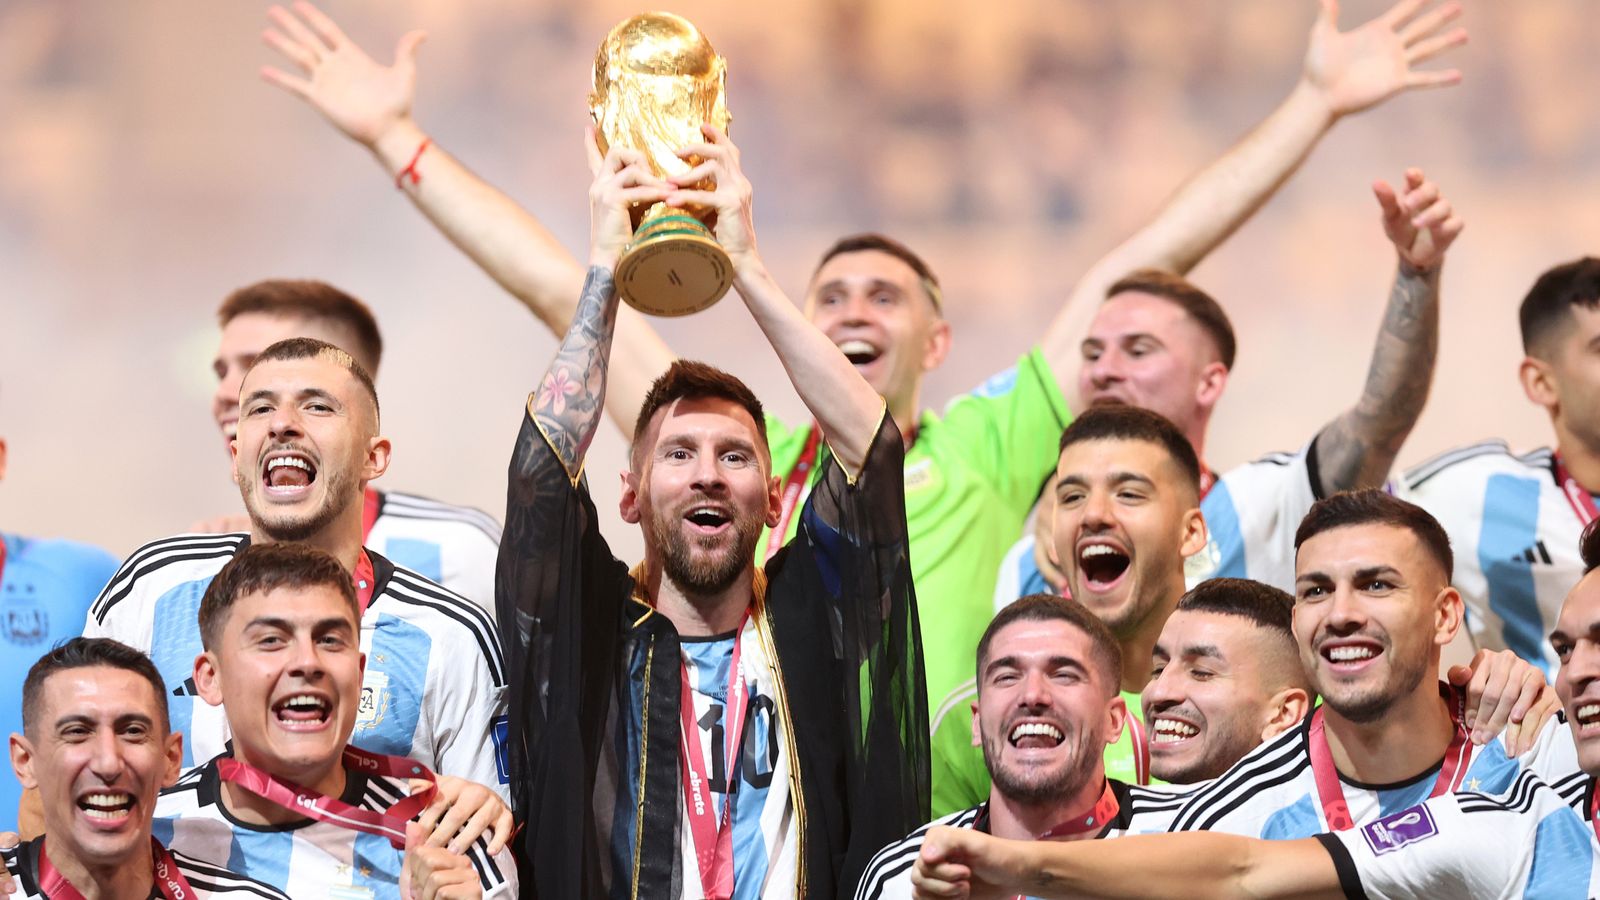 Argentina win incredible World Cup final in shootout